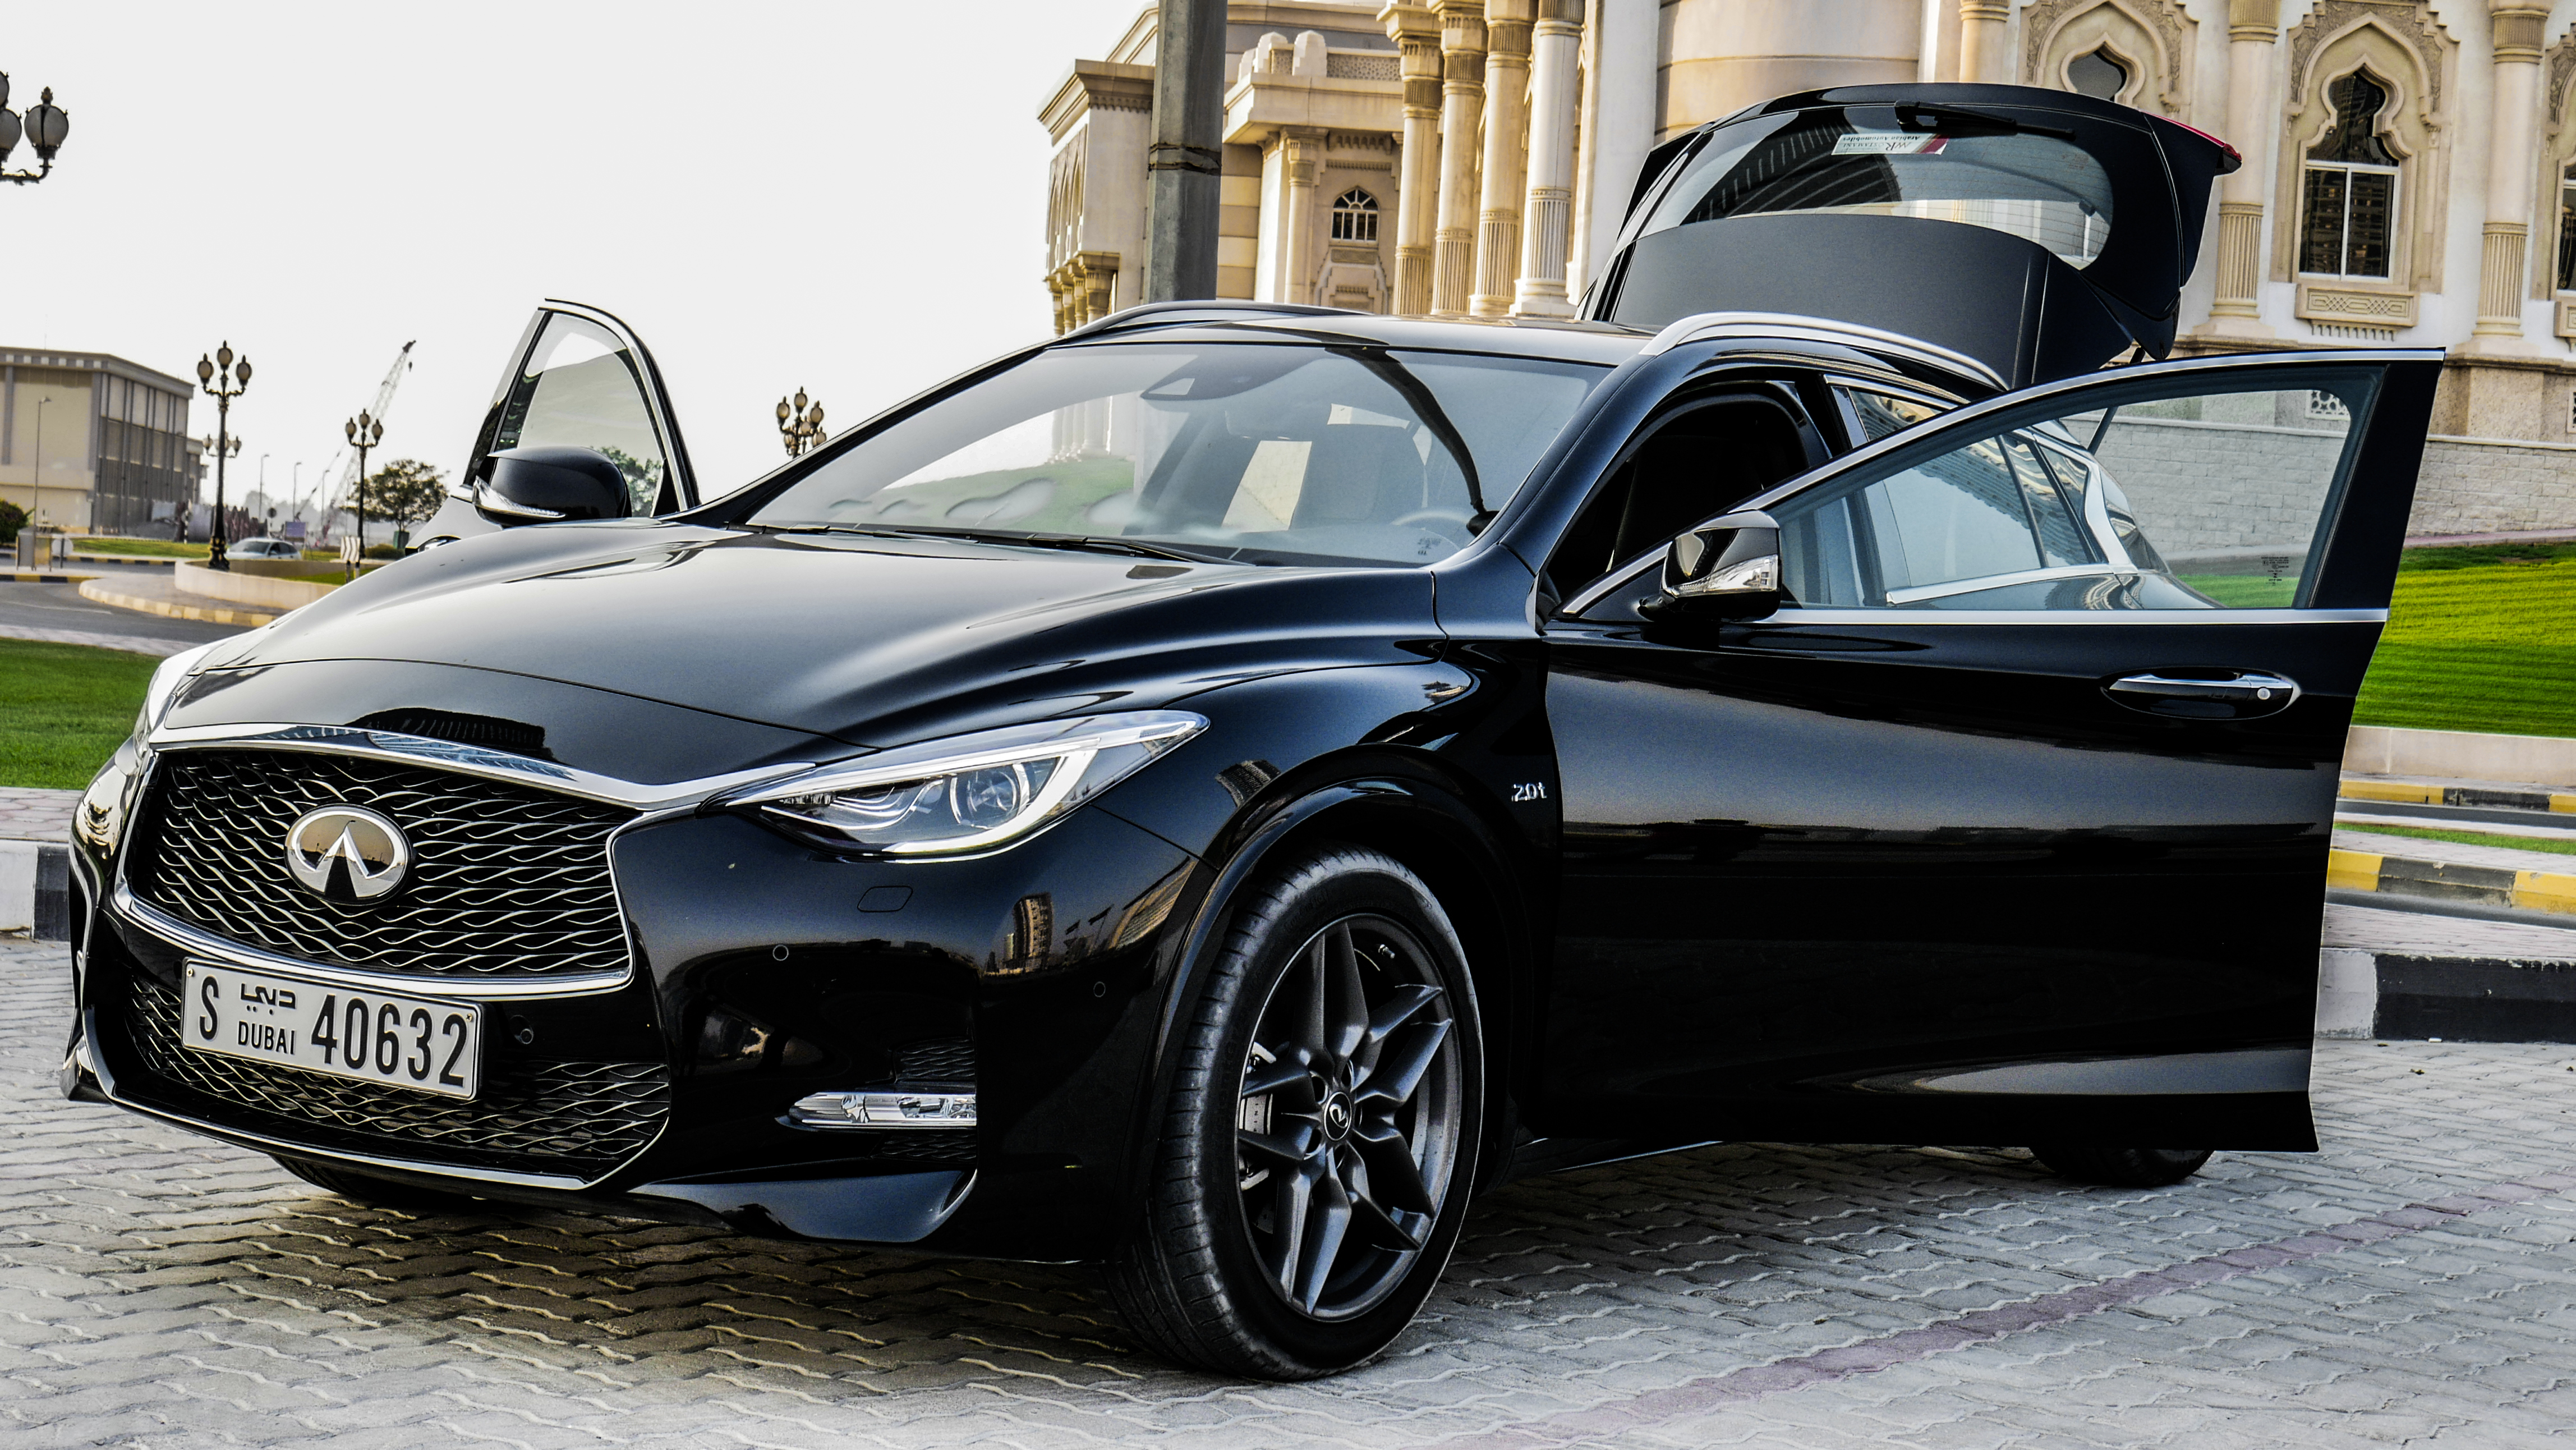 2017 Infiniti Q30: Taking a Unique Approach to Compact Luxury Segment